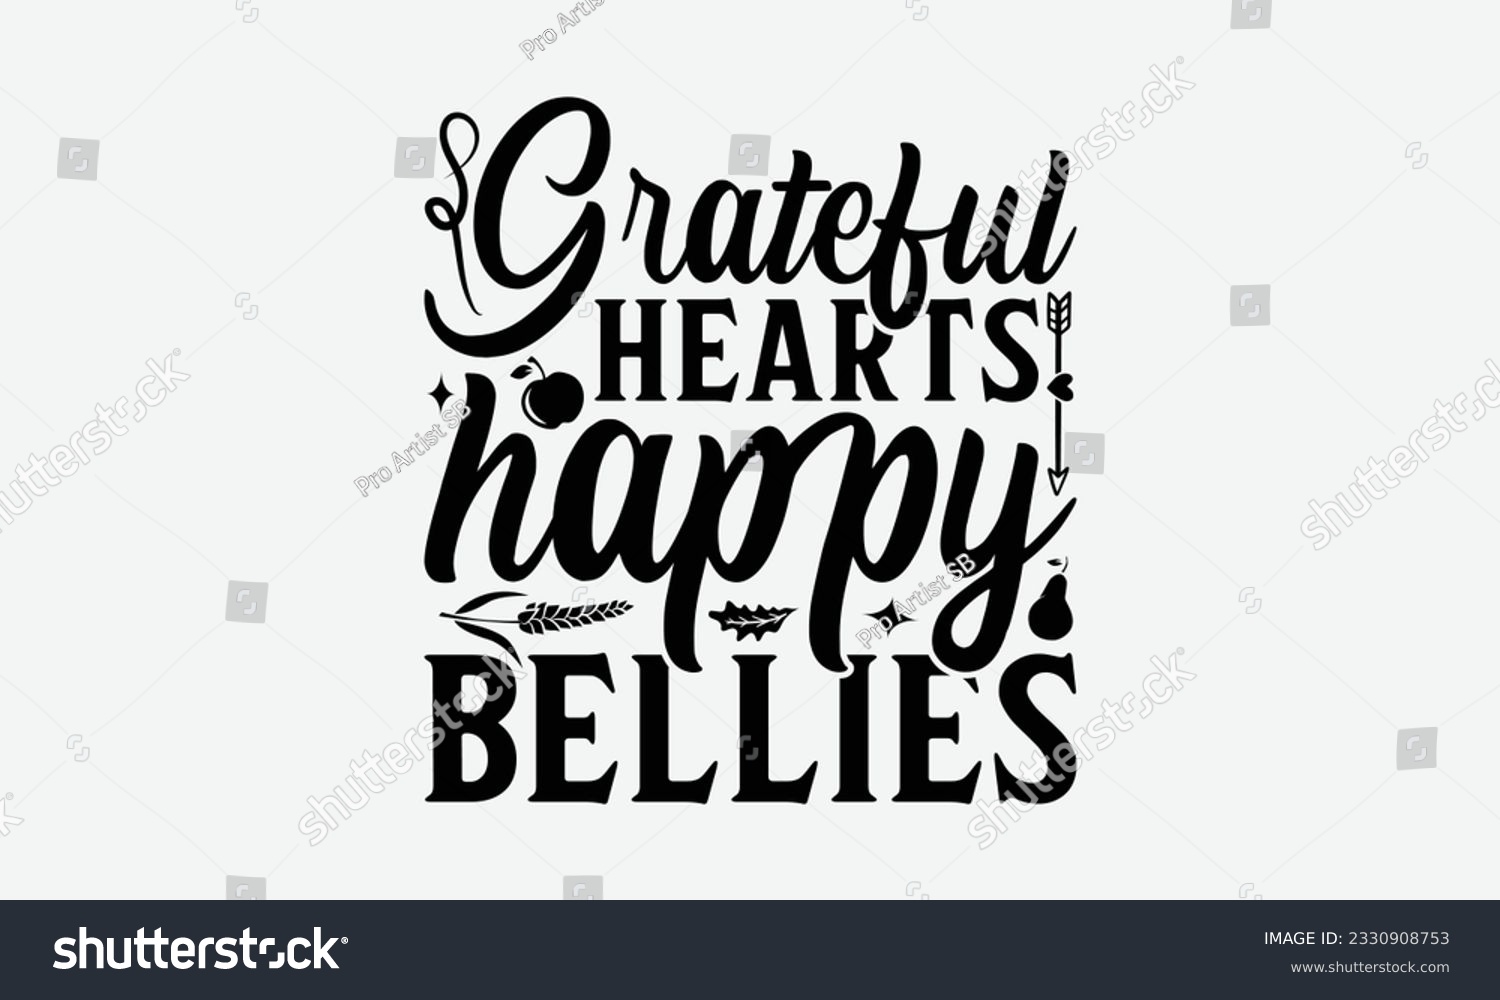 SVG of Grateful Hearts Happy Bellies - Thanksgiving T-shirt Design Template, Happy Turkey Day SVG Quotes, Hand Drawn Lettering Phrase Isolated On White Background. svg